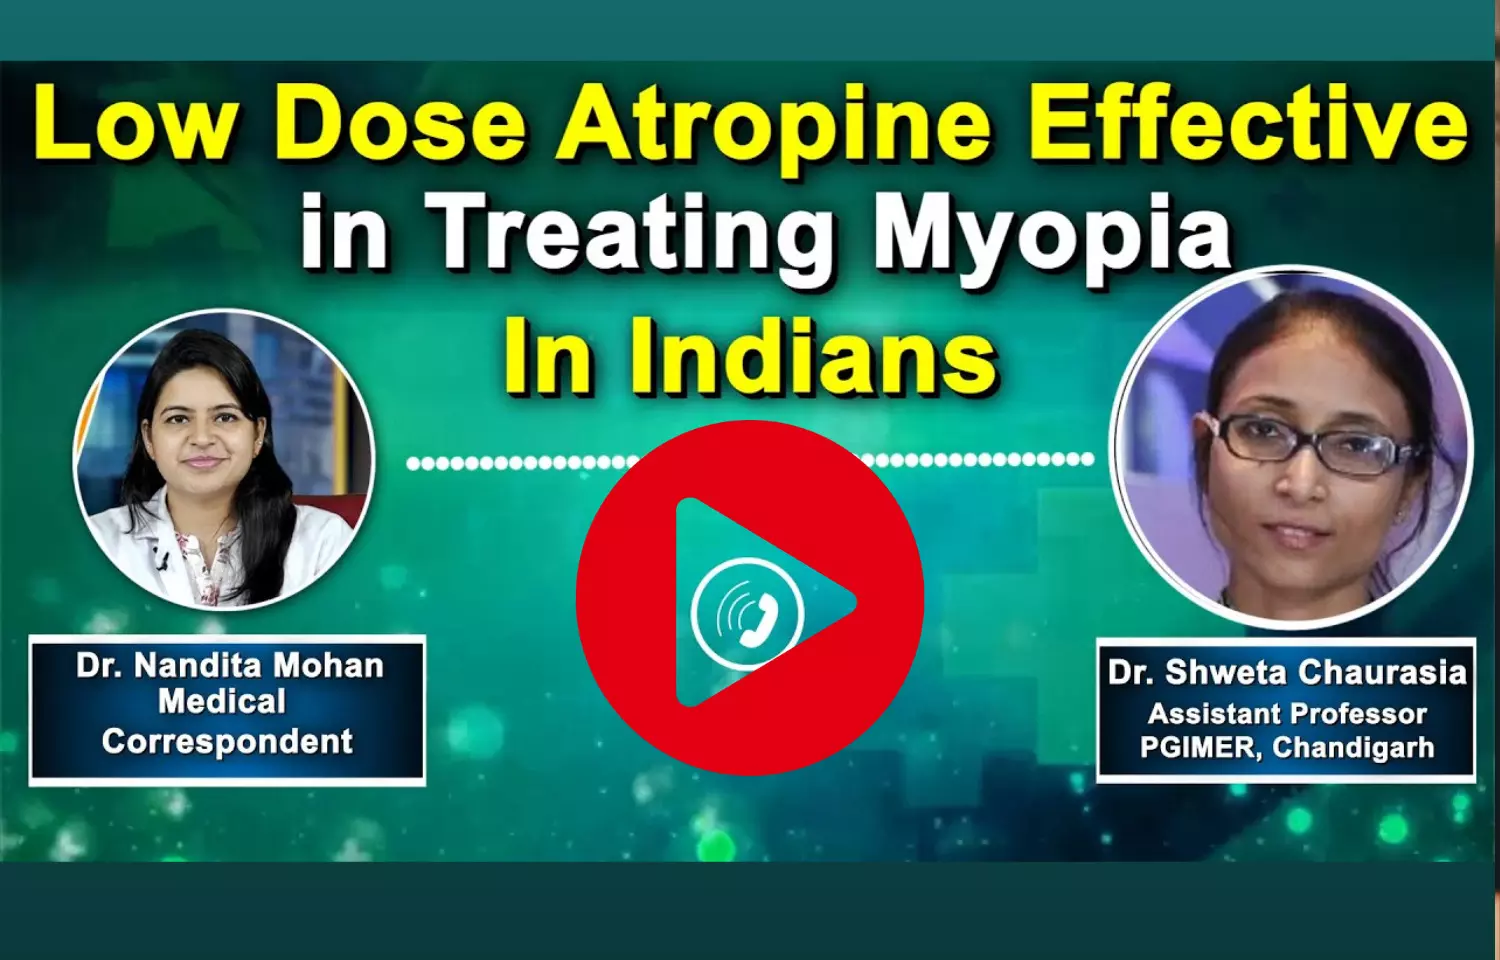 Journal Club - Low dose atropine has been found to be effective in treating myopia